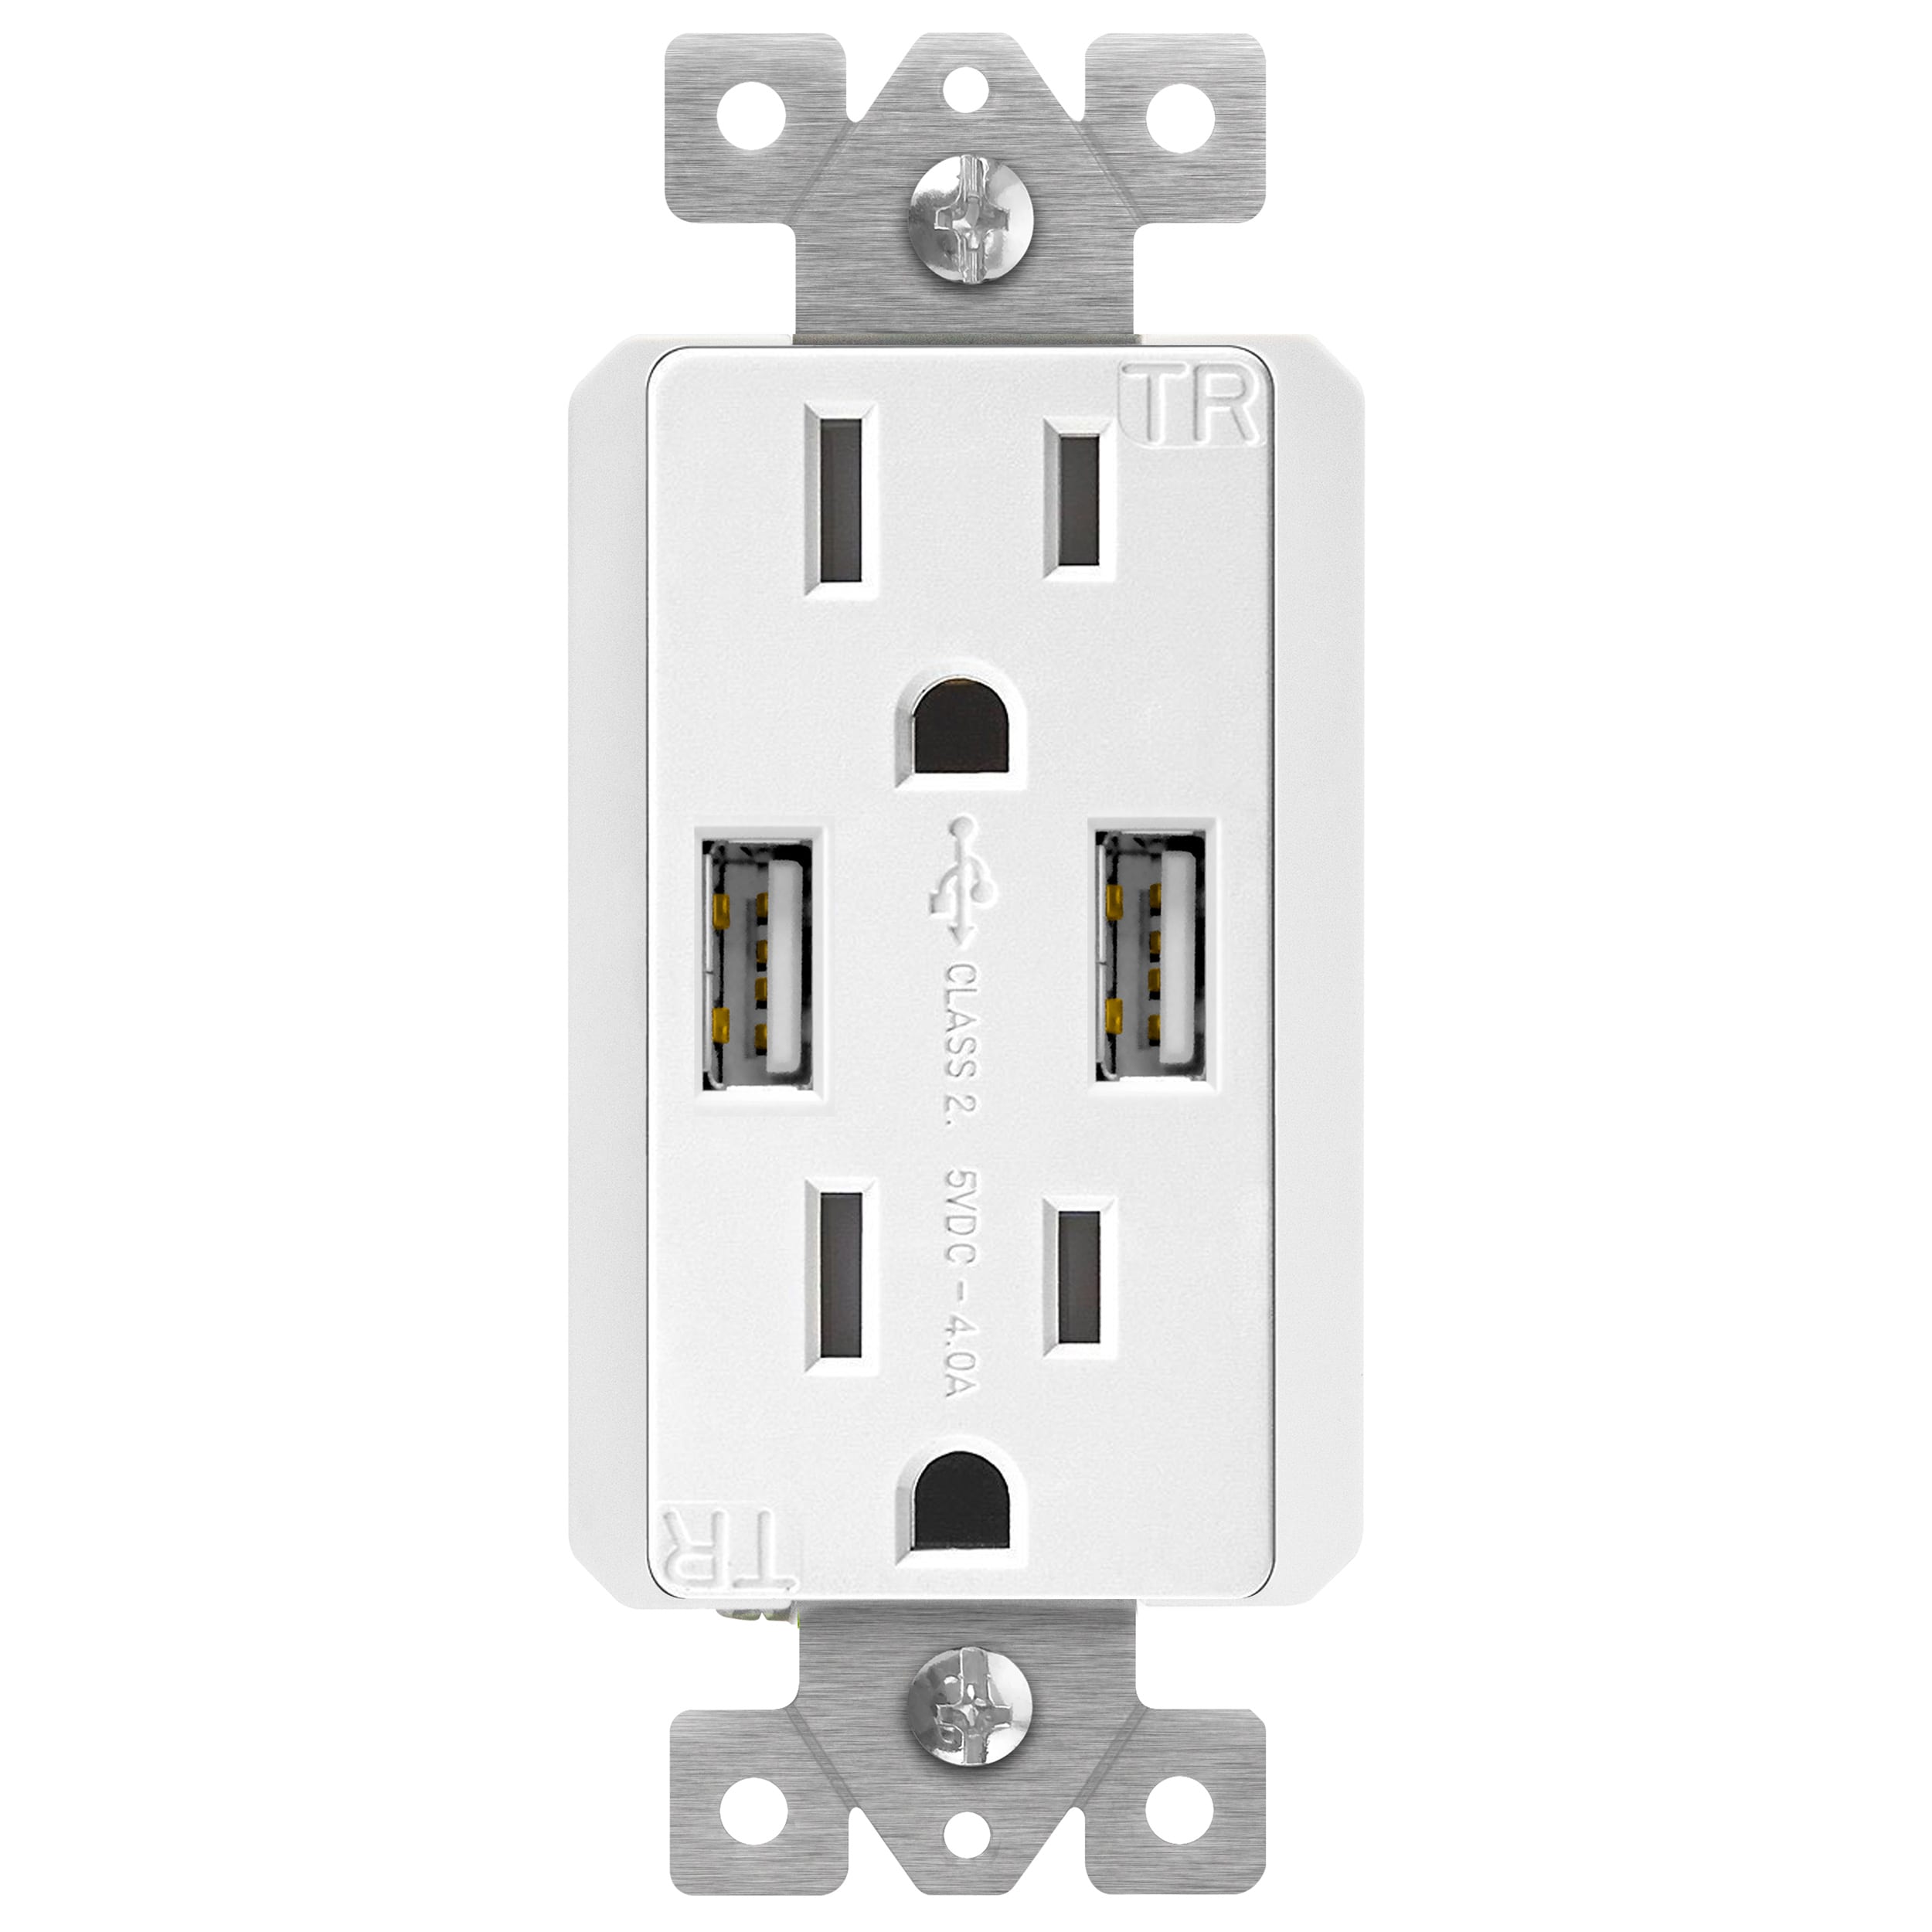 White TOPGREENER TU2154A High Speed USB Charger Receptacle 